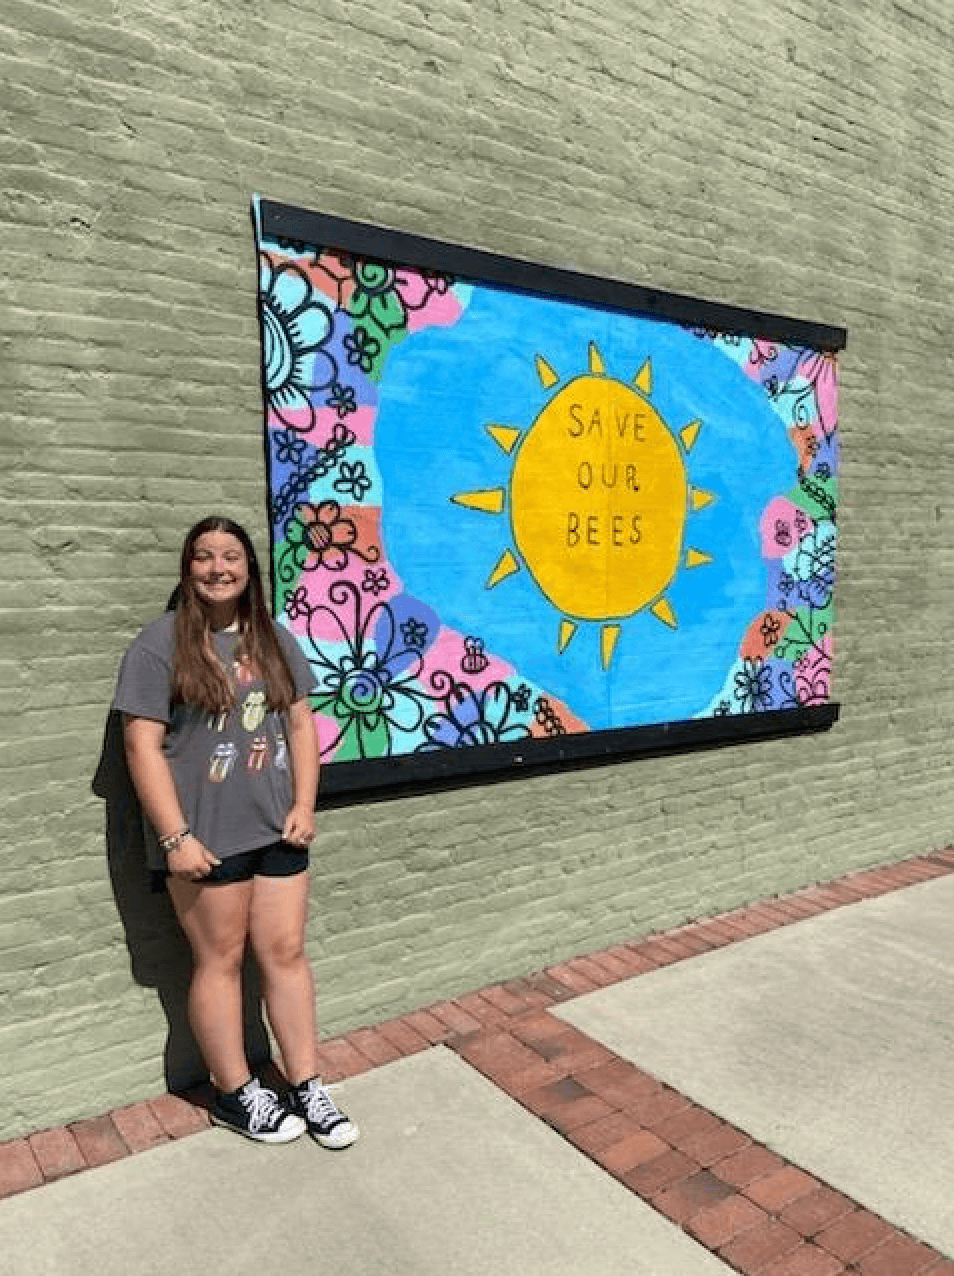 New pollinator census grand marshal Mia Burnett, a member of Georgia 4-H, stands in front of her bee mural outside, which says "save our bees" within a sun illustration.